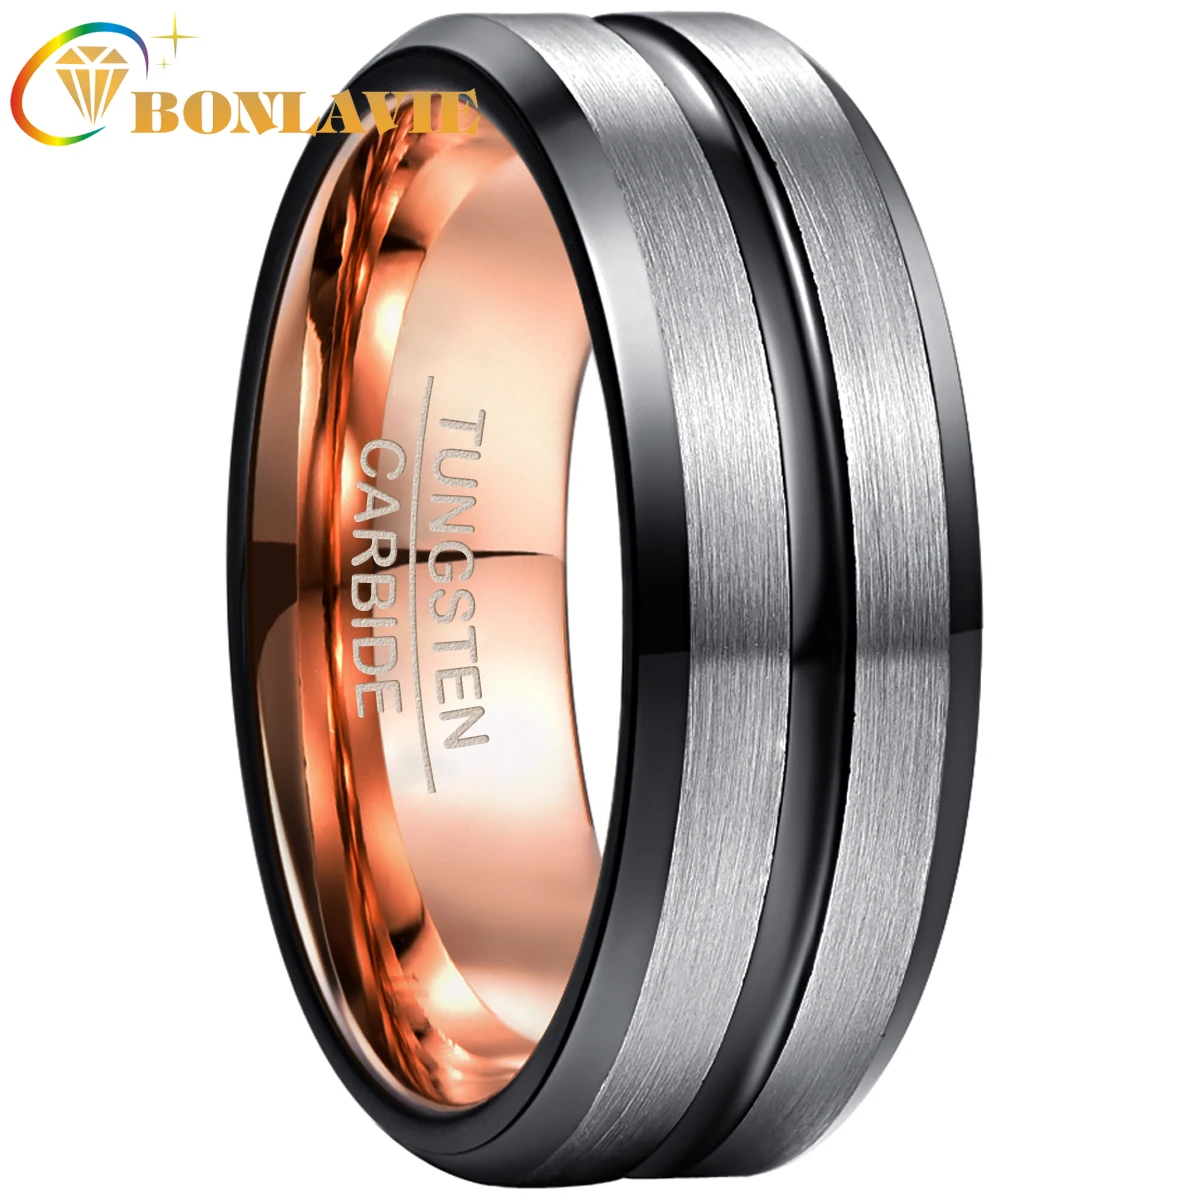 

BONLAVIE 8mm Tungsten Carbide Ring Electroplated RoseGold Inner Ring+ Black Bevel Groove/steel Frosted Surface Ring